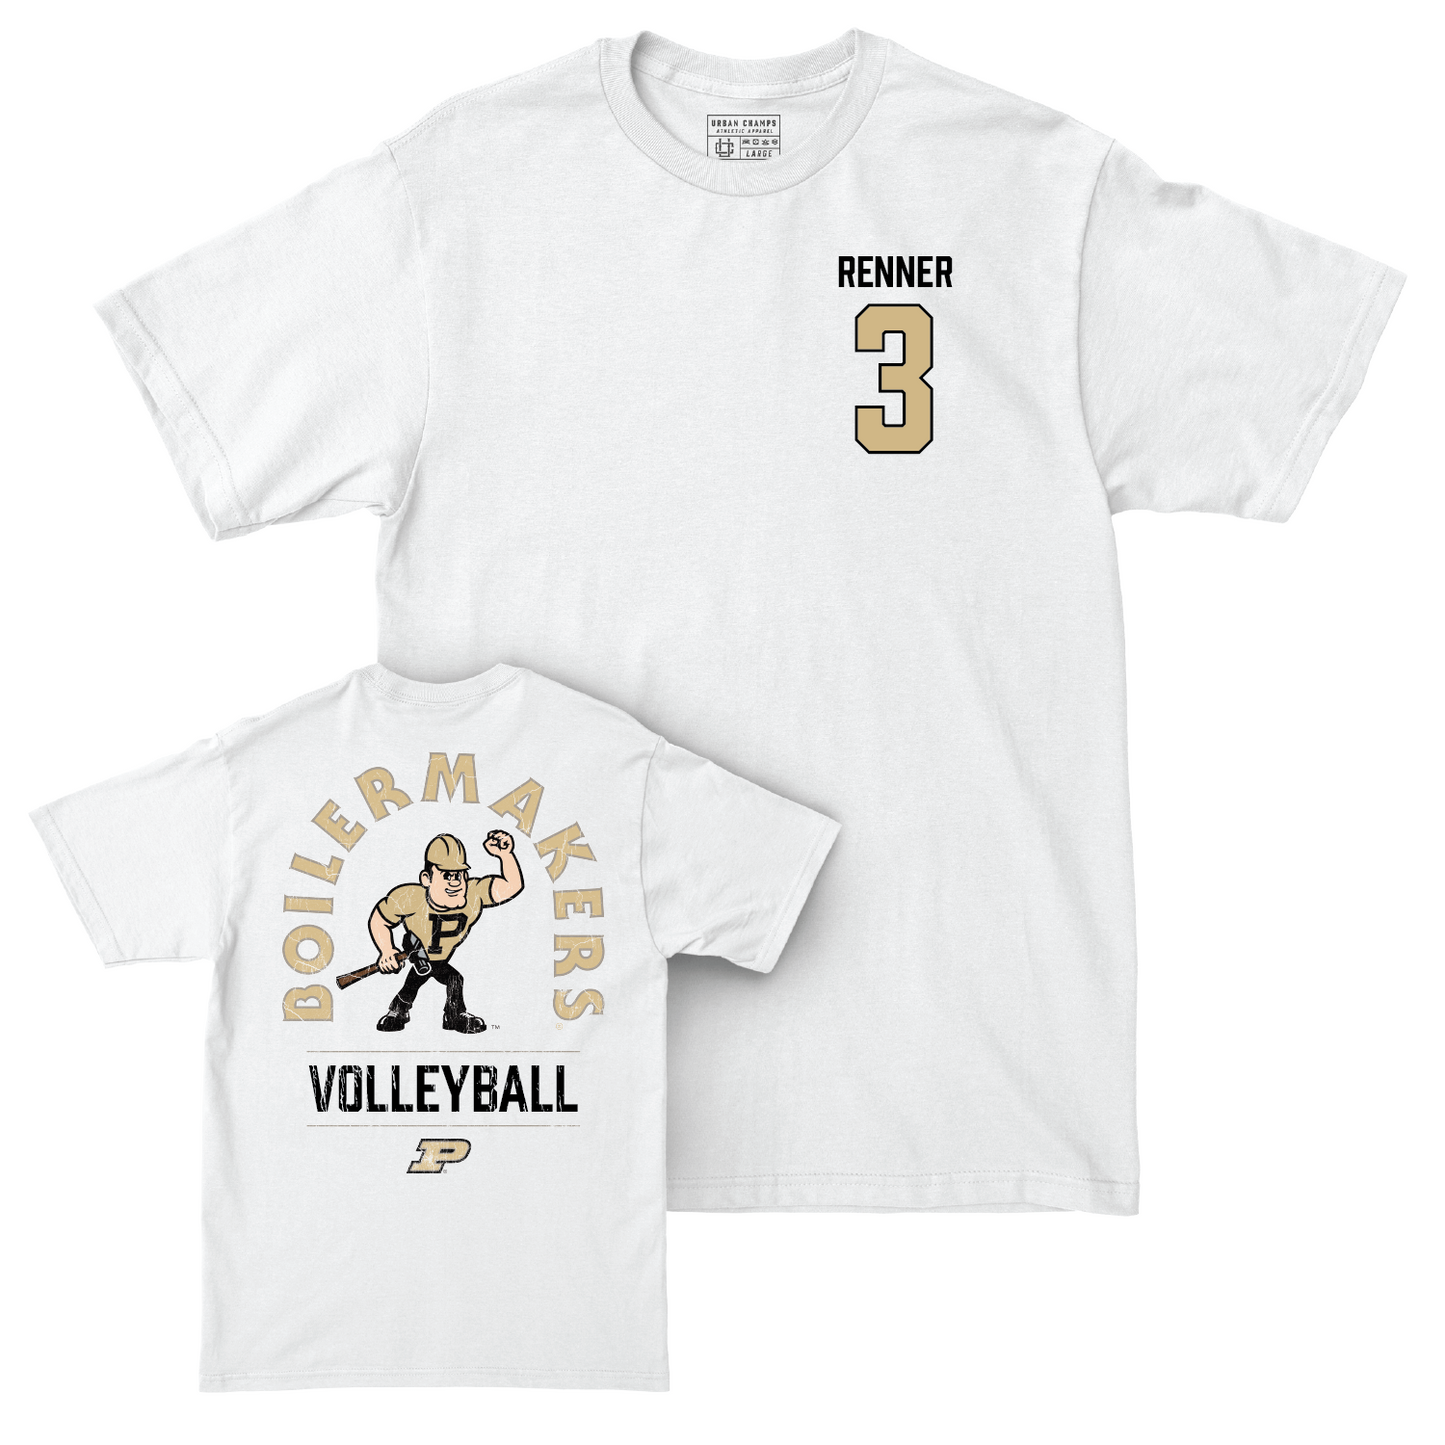 Women's Volleyball White Mascot Comfort Colors Tee - Megan Renner | #3 Youth Small